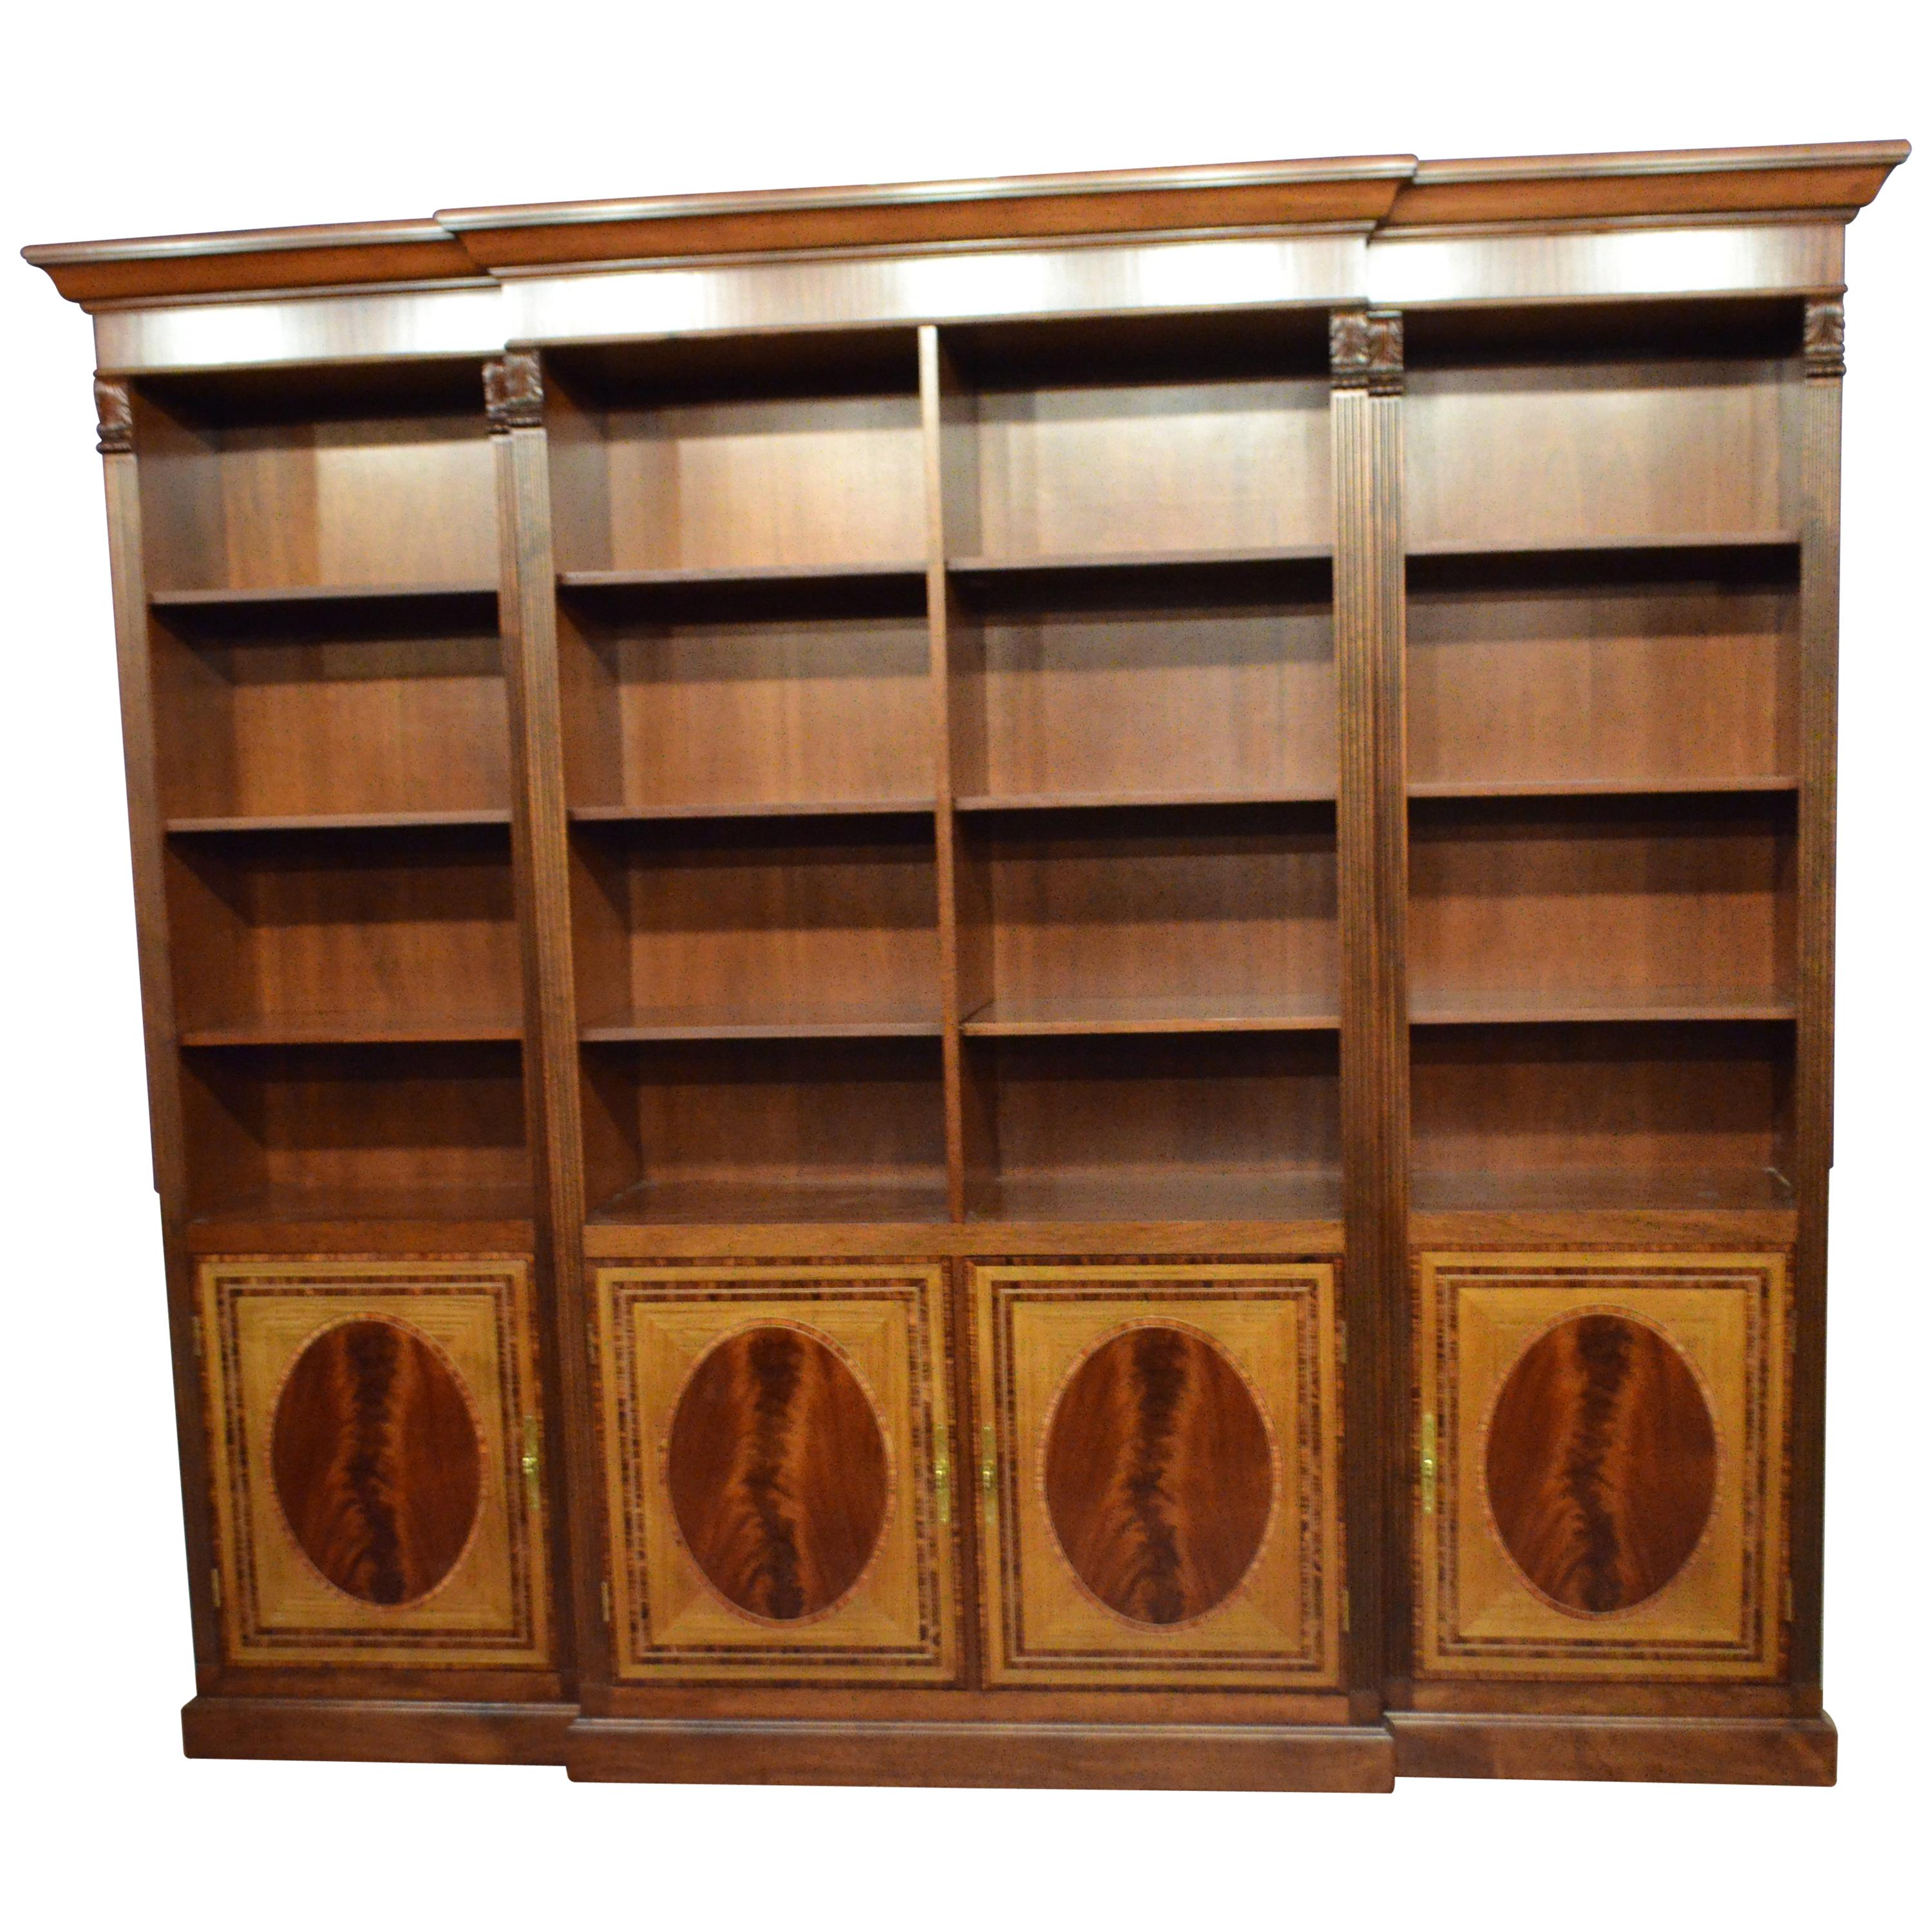 Large Mahogany Georgian Style Four-Door Bookcase by Leighton Hall For Sale